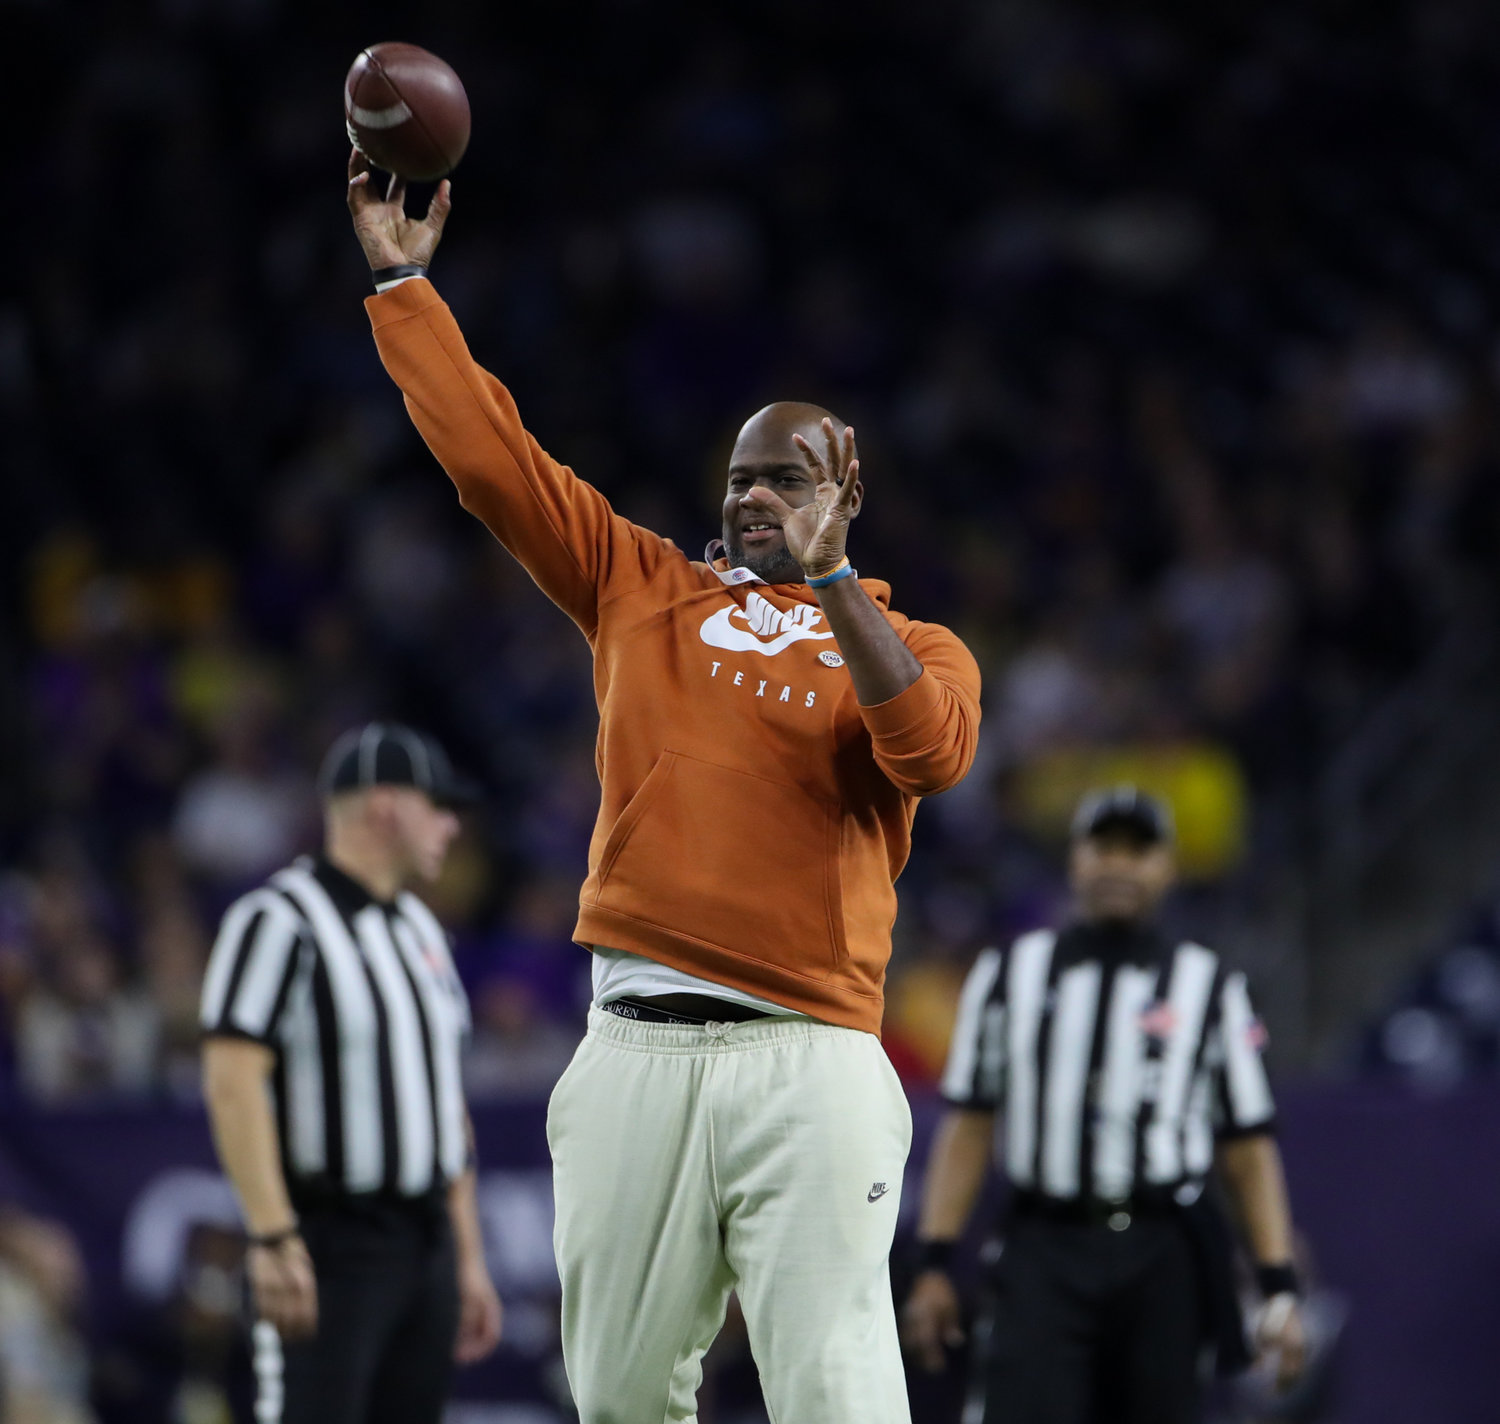 Texas Longorns legendary quarterback Vince Young throws the ball during an entertainment break in the TaxAct Texas Bowl on Jan. 4, 2022 in Houston, Texas.